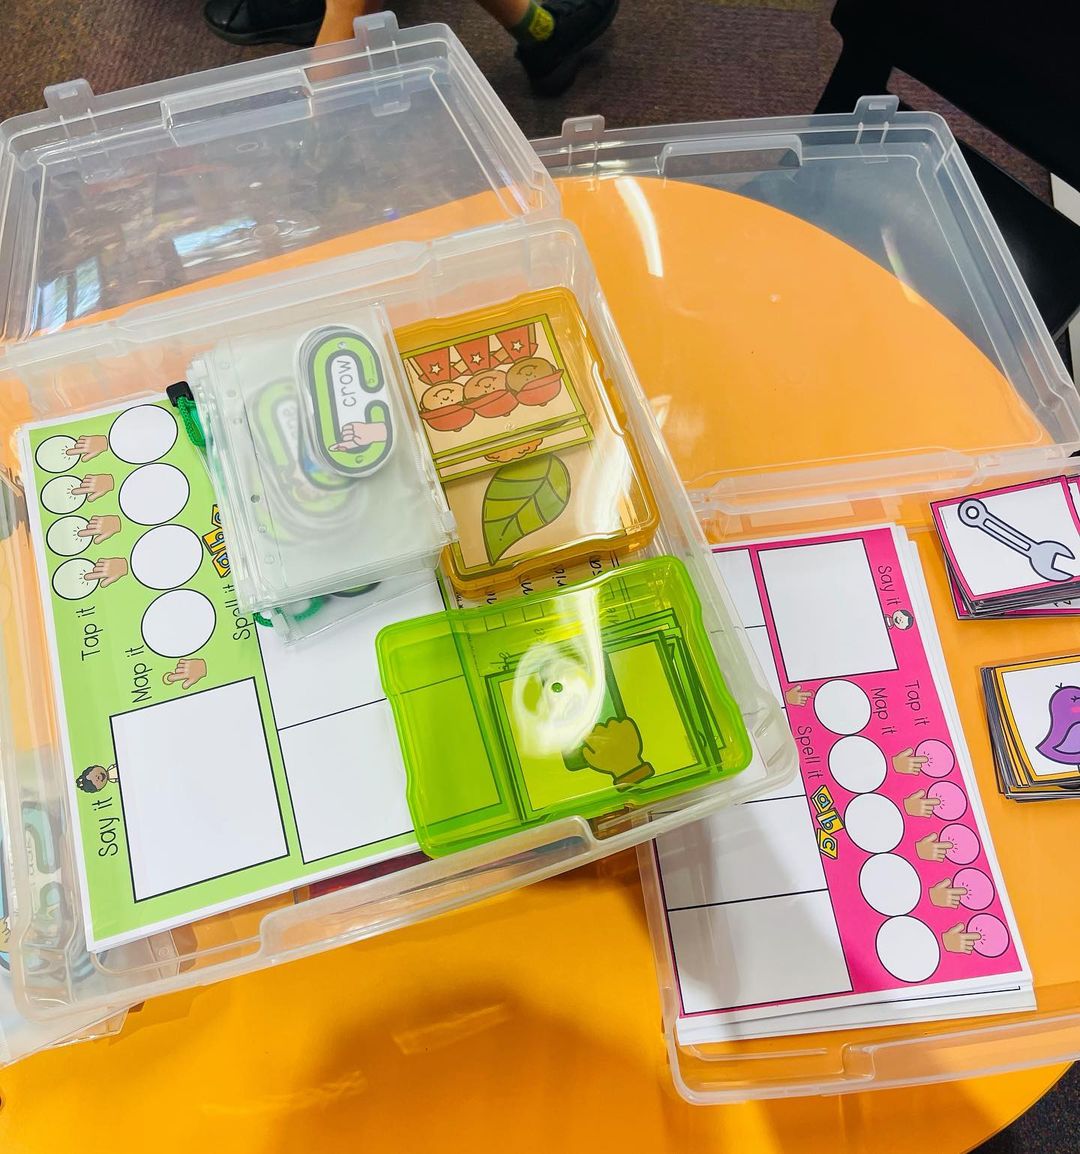 Kmart hacks for teachers: phonics teaching resources stacked in a clear plastic container. 